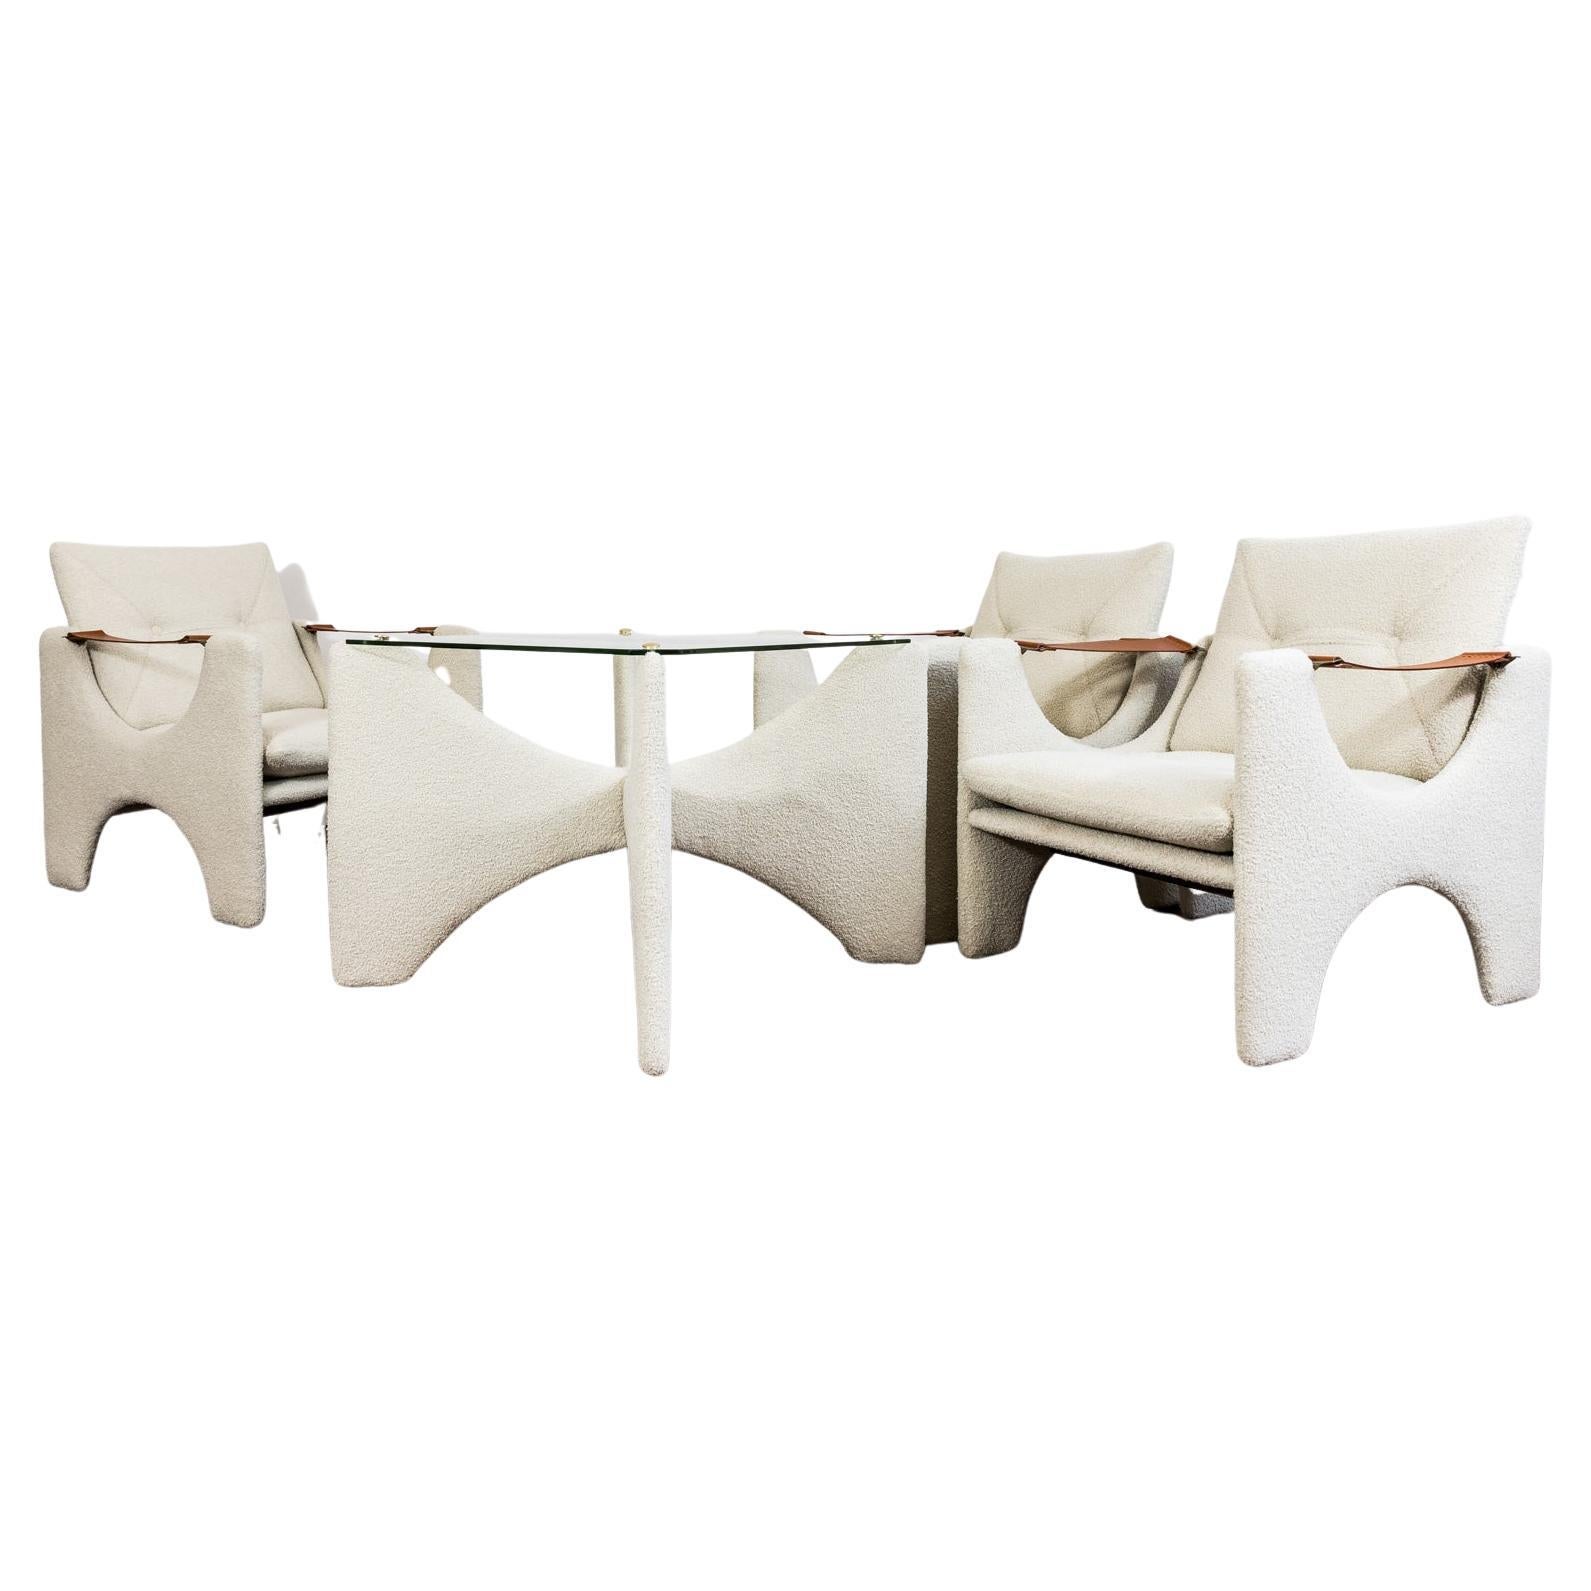 Armchairs & Coffee Table, Poland, 1975, Set of 4